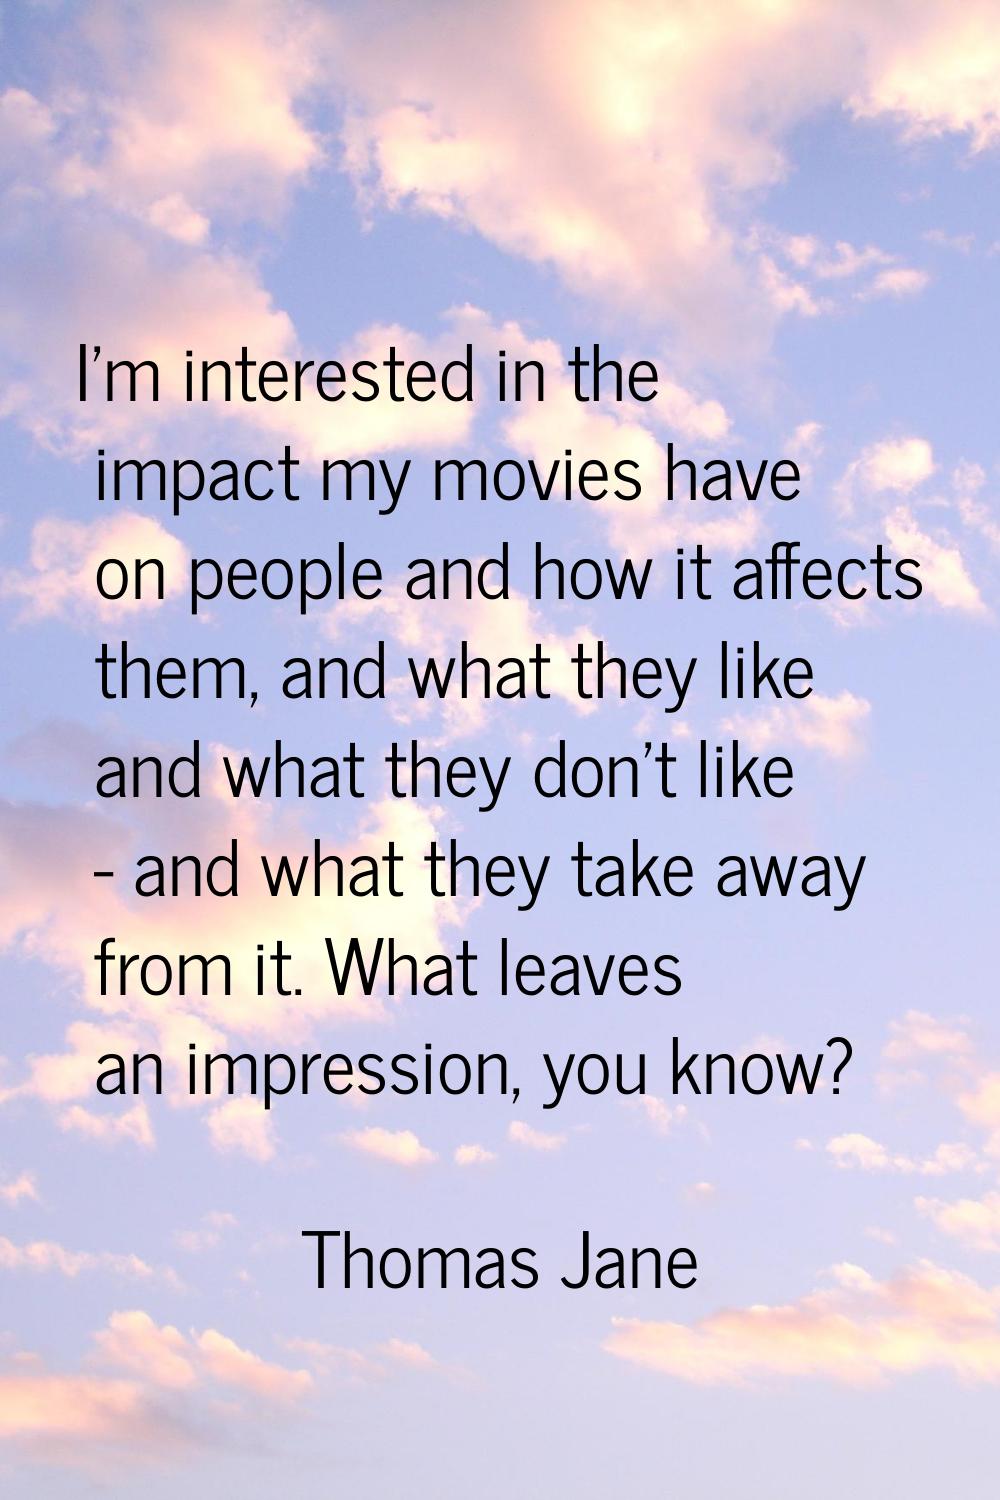 I'm interested in the impact my movies have on people and how it affects them, and what they like a